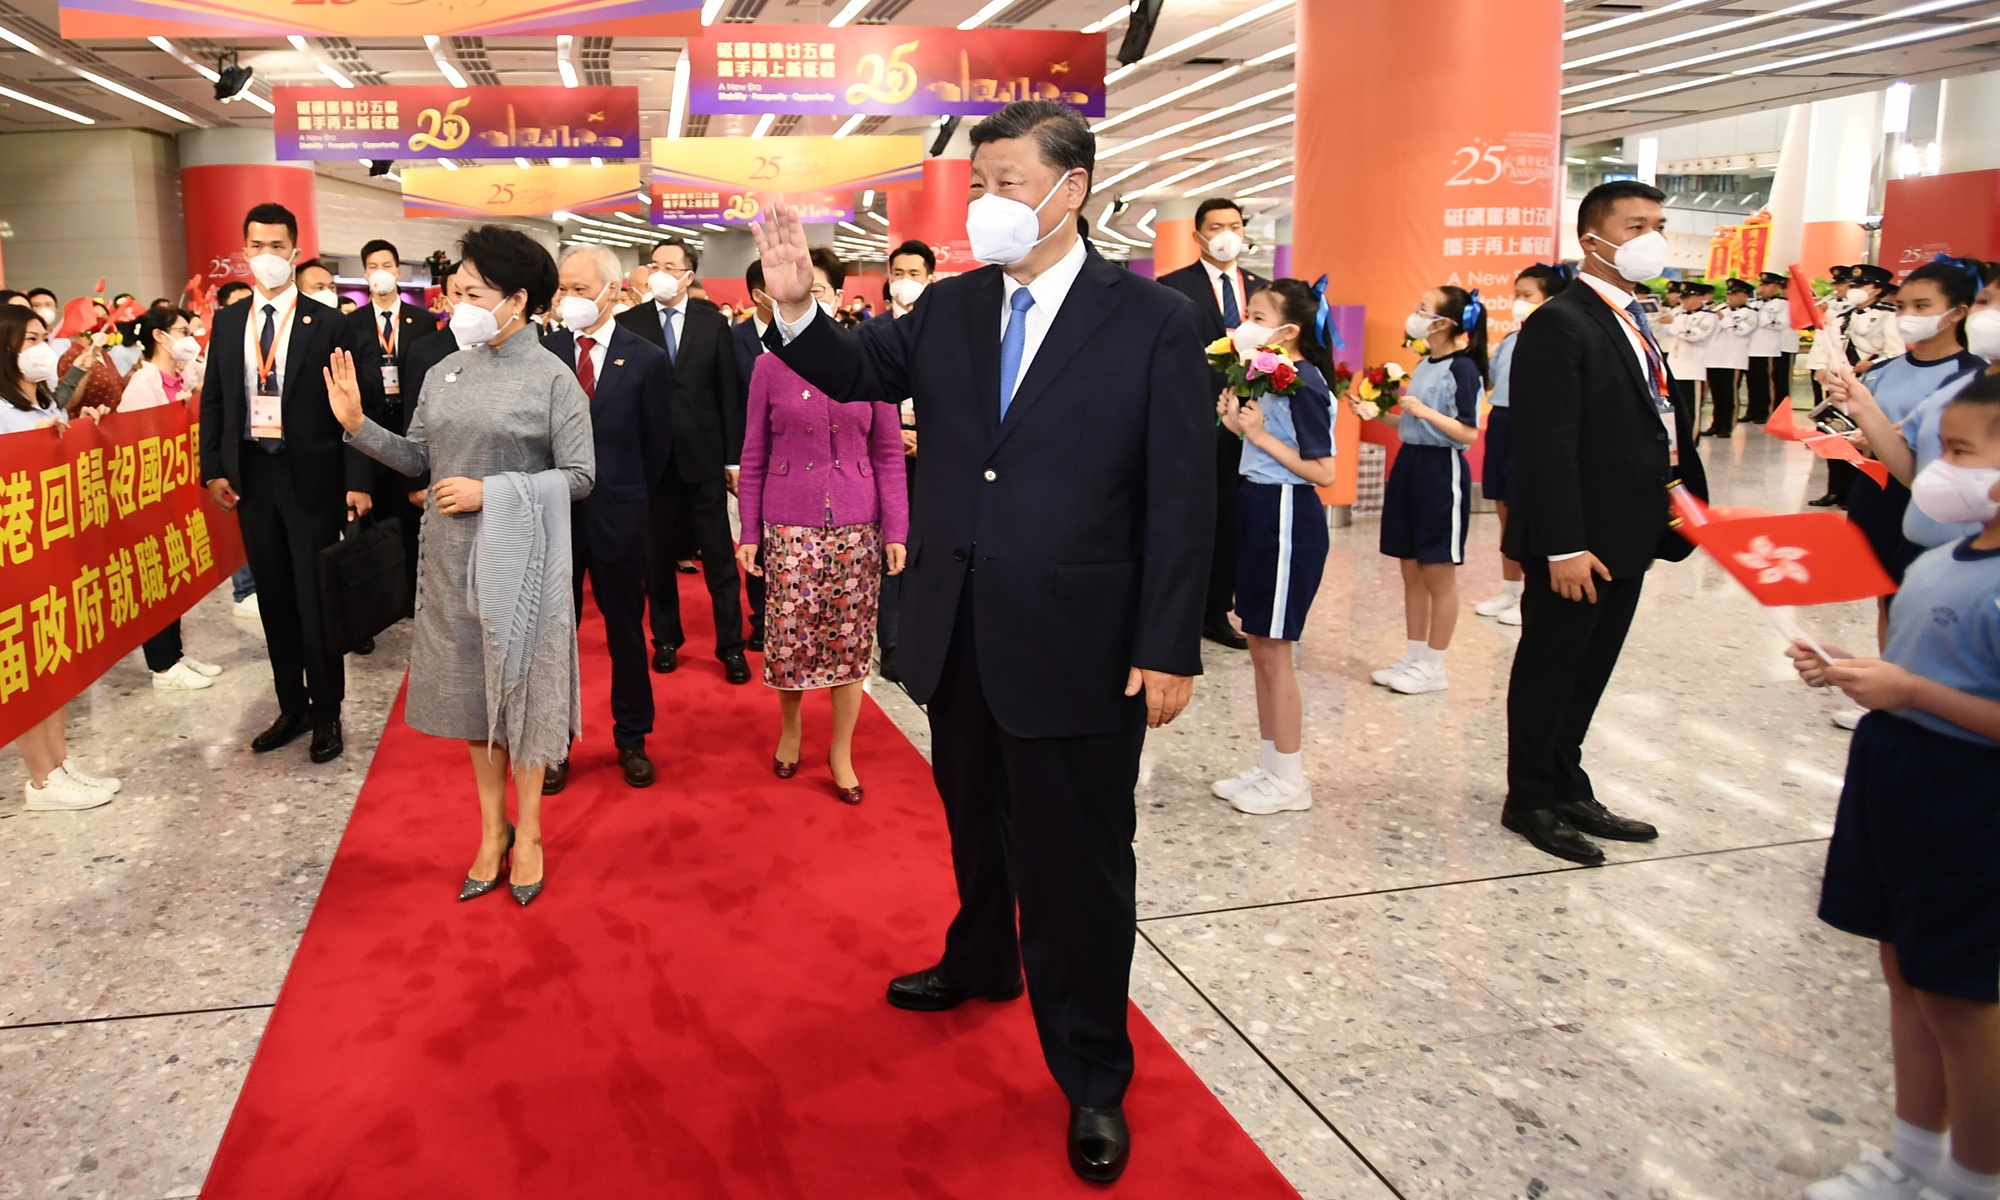 Chinese President Xi Jinping and his wife Peng Liyuan wave to the welcoming crowd upon their arrival in Hong Kong, on June 30, 2022. Xi, also general secretary of the Communist Party of China Central Committee and chairman of the Central Military Commission, arrived in Hong Kong by train. 
Photo: Xinhua